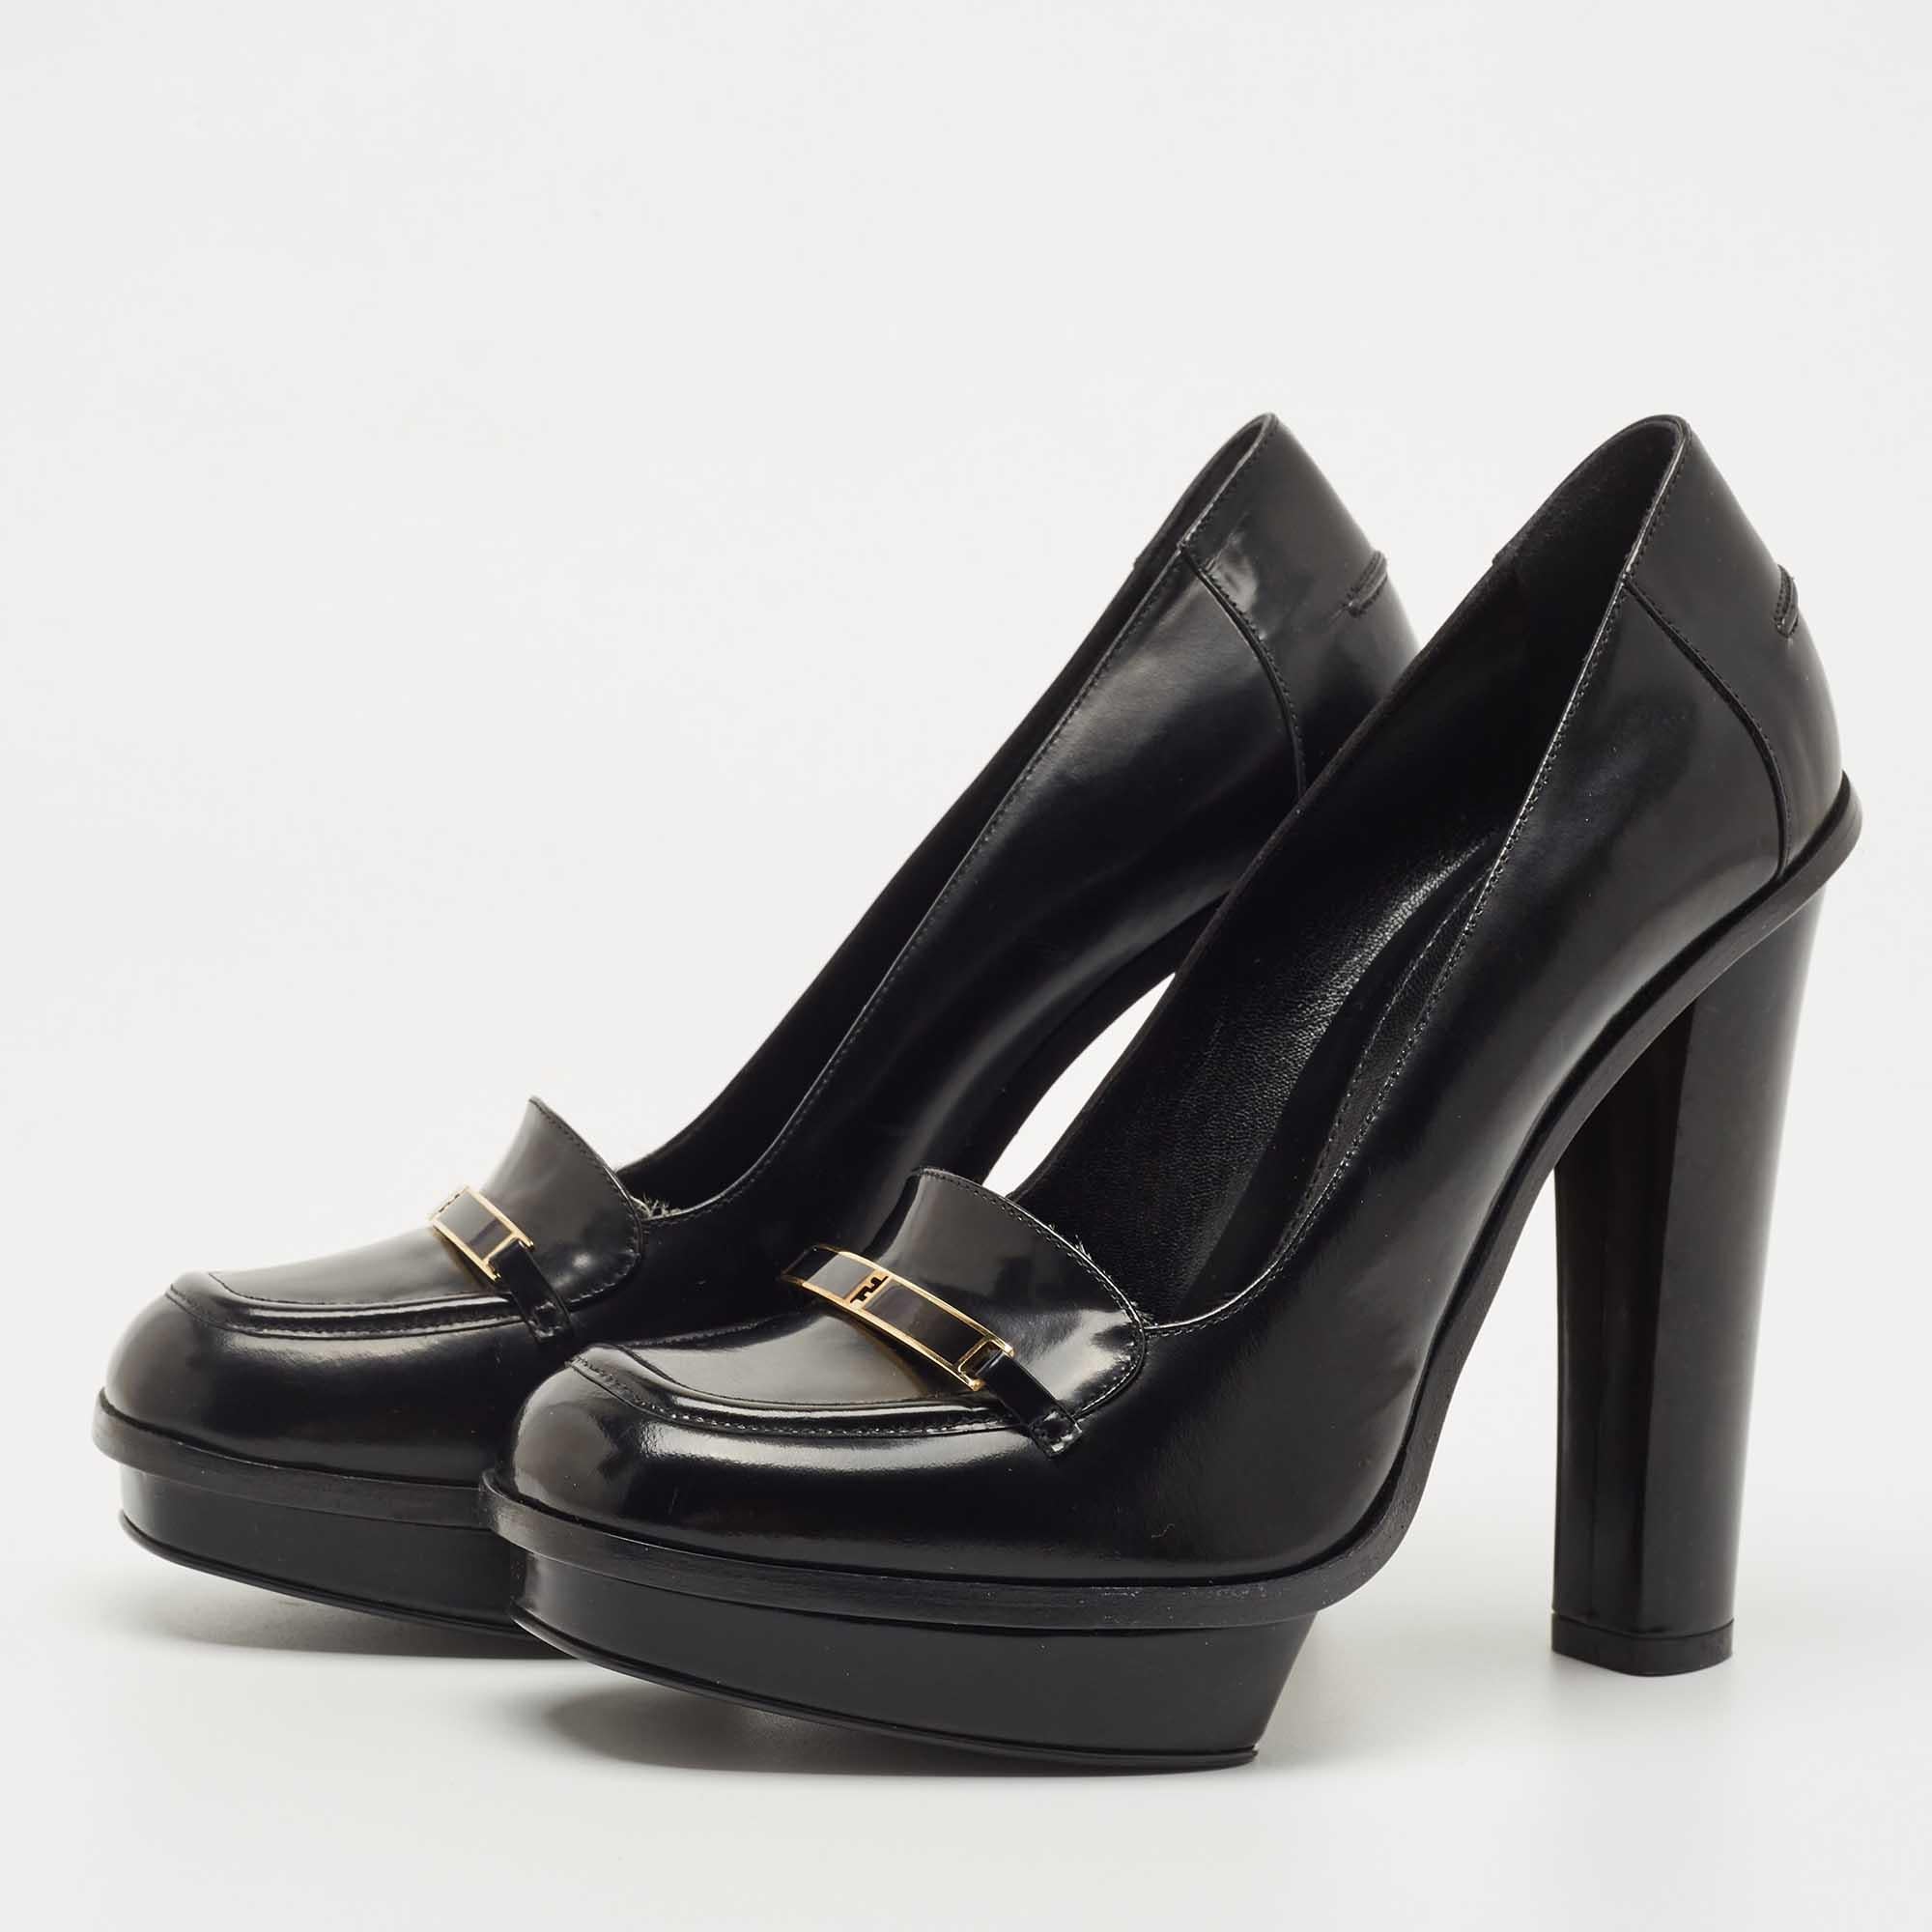 The fashion house’s tradition of excellence, coupled with modern design sensibilities, works to make these Fendi pumps a fabulous choice. They'll help you deliver a chic look with ease.

Includes: Original Box